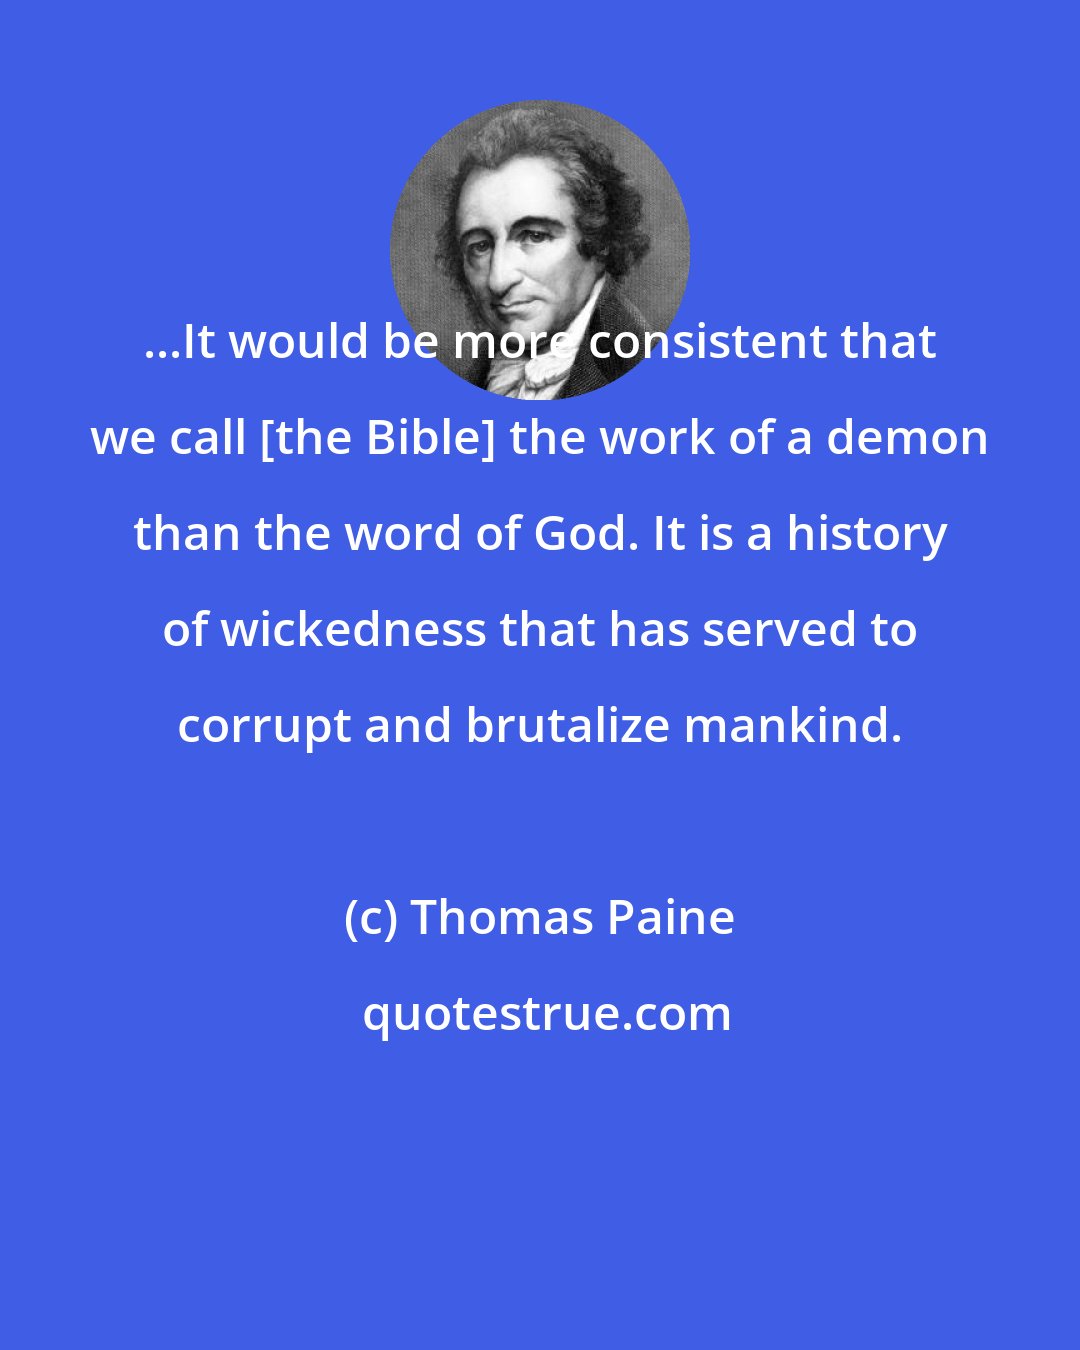 Thomas Paine: ...It would be more consistent that we call [the Bible] the work of a demon than the word of God. It is a history of wickedness that has served to corrupt and brutalize mankind.